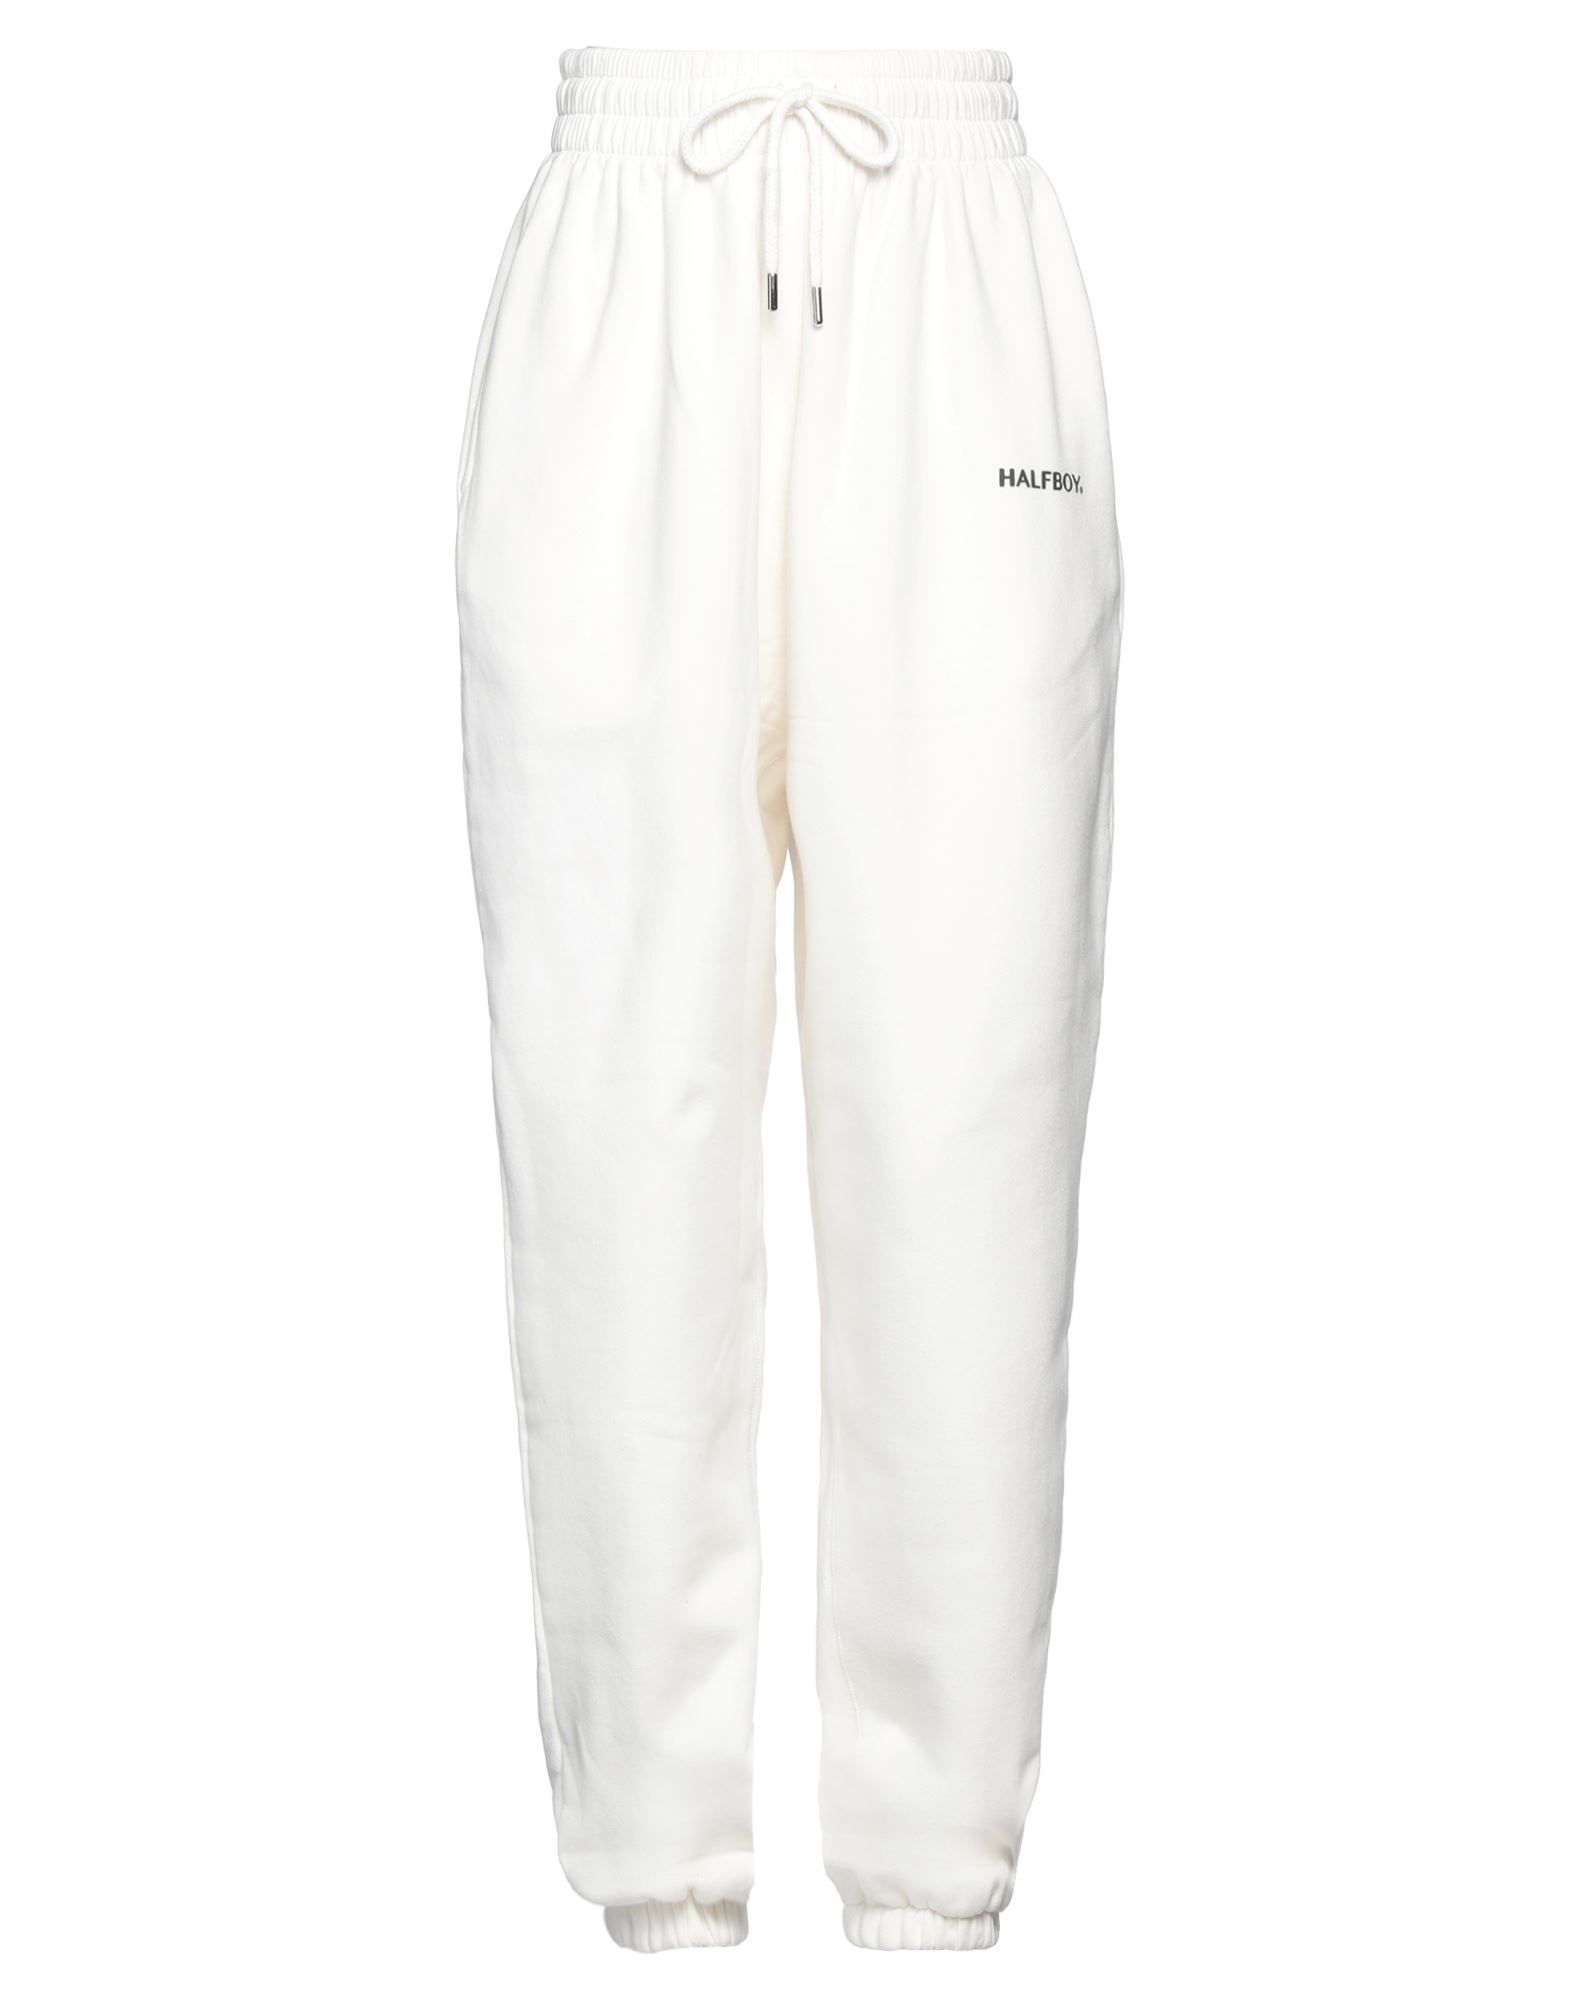 Halfboy Pants In Off White